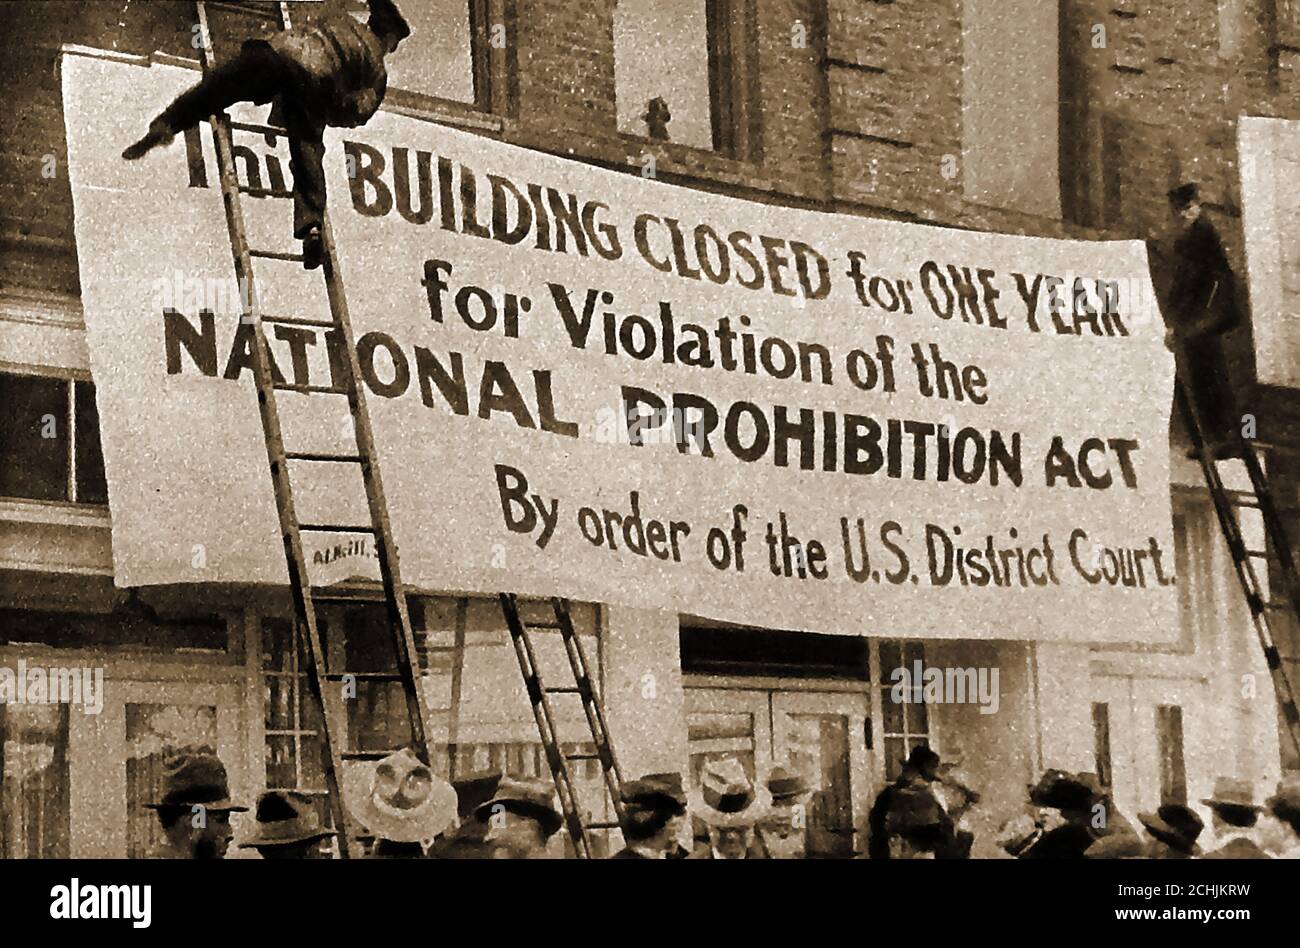 1922 American prohibition - An old photograph showing the authorities Hanging up a poster advising a building is being closed for breaching the National Prohibition Act. Prohibition in the United States constituted a virtual nationwide ban on the production, importation, transportation, and sale of alcoholic beverages. It lasted from 1920 to 1933. Stock Photo